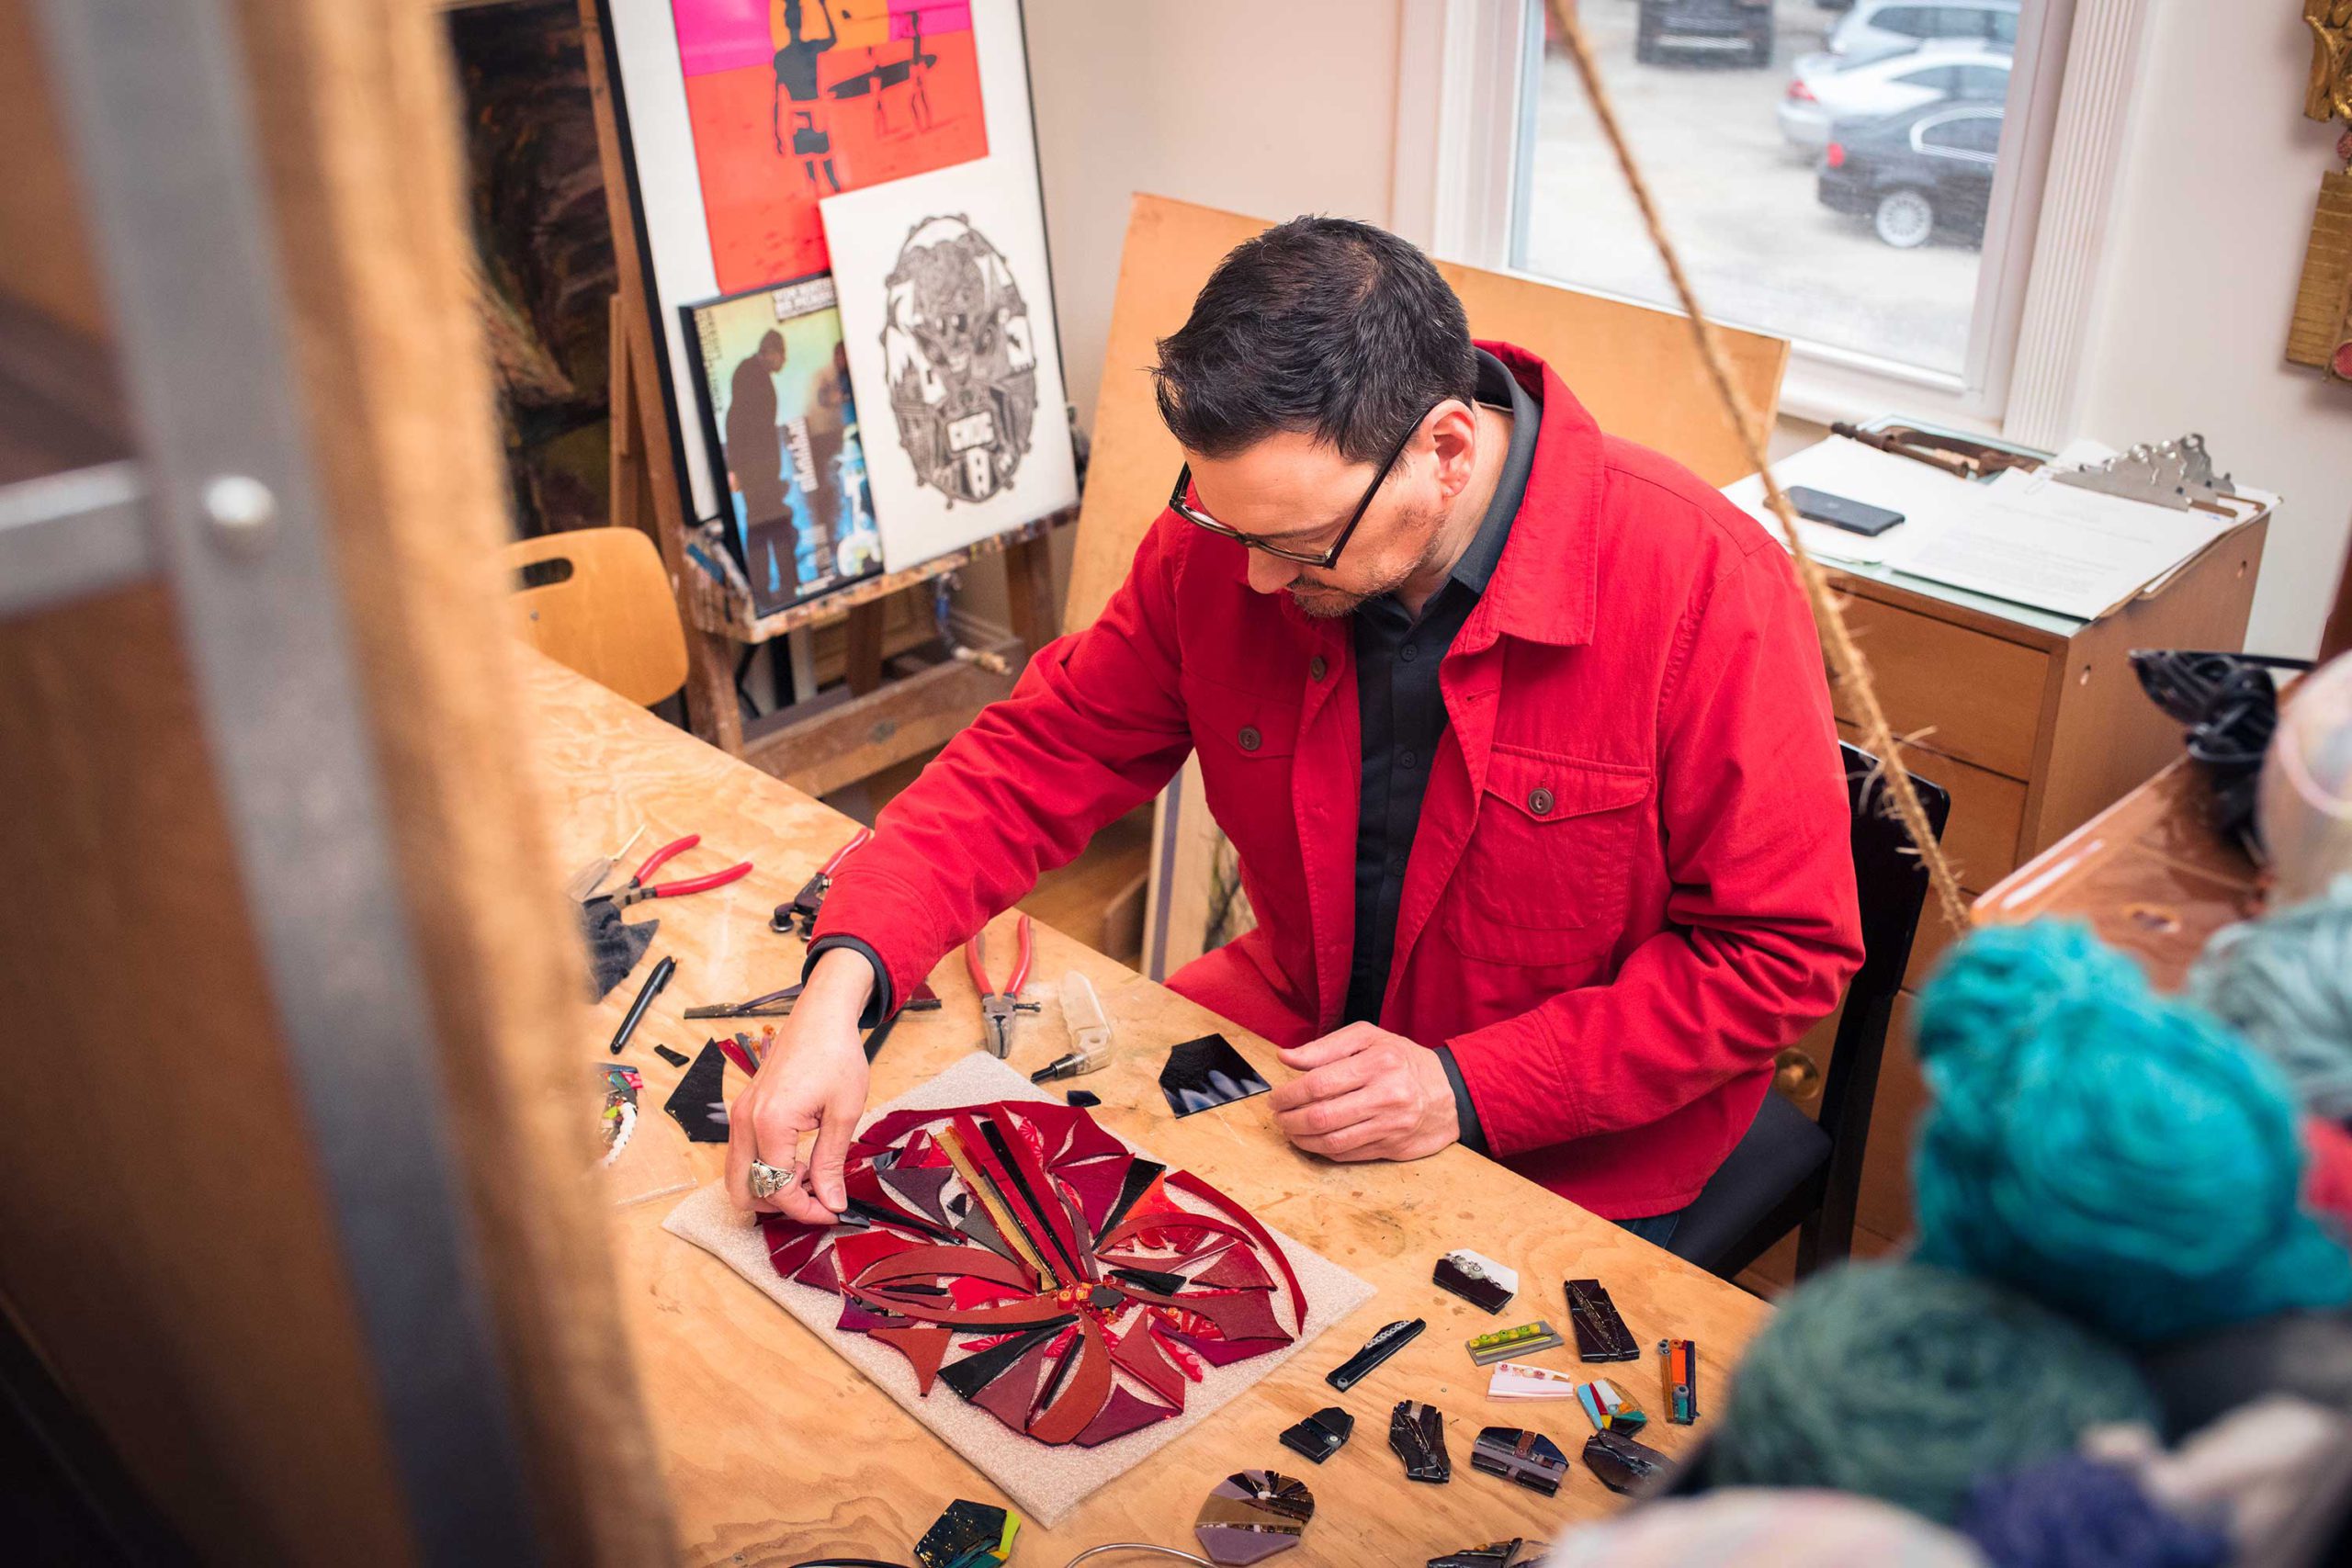 Artist Gregory Dierlam works on a fused glass piece at his gallery Art Meets Vintage.